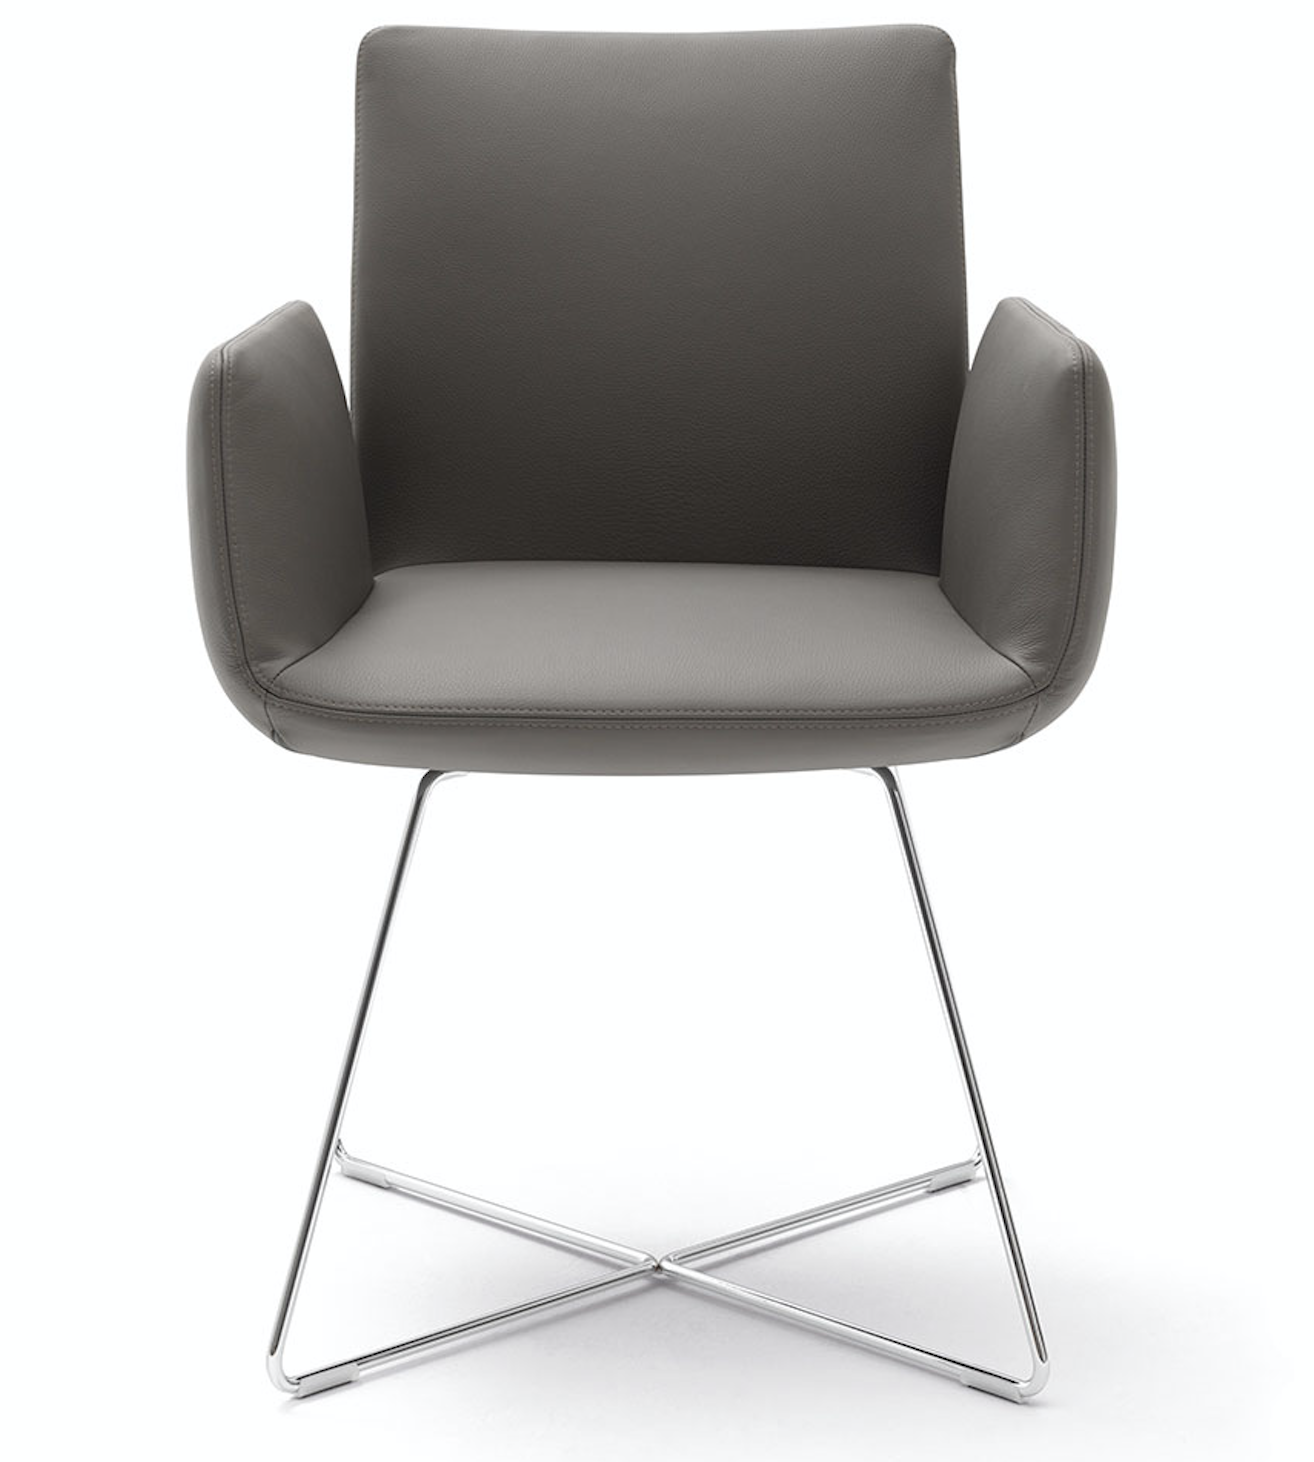 Jalis chair Product Image